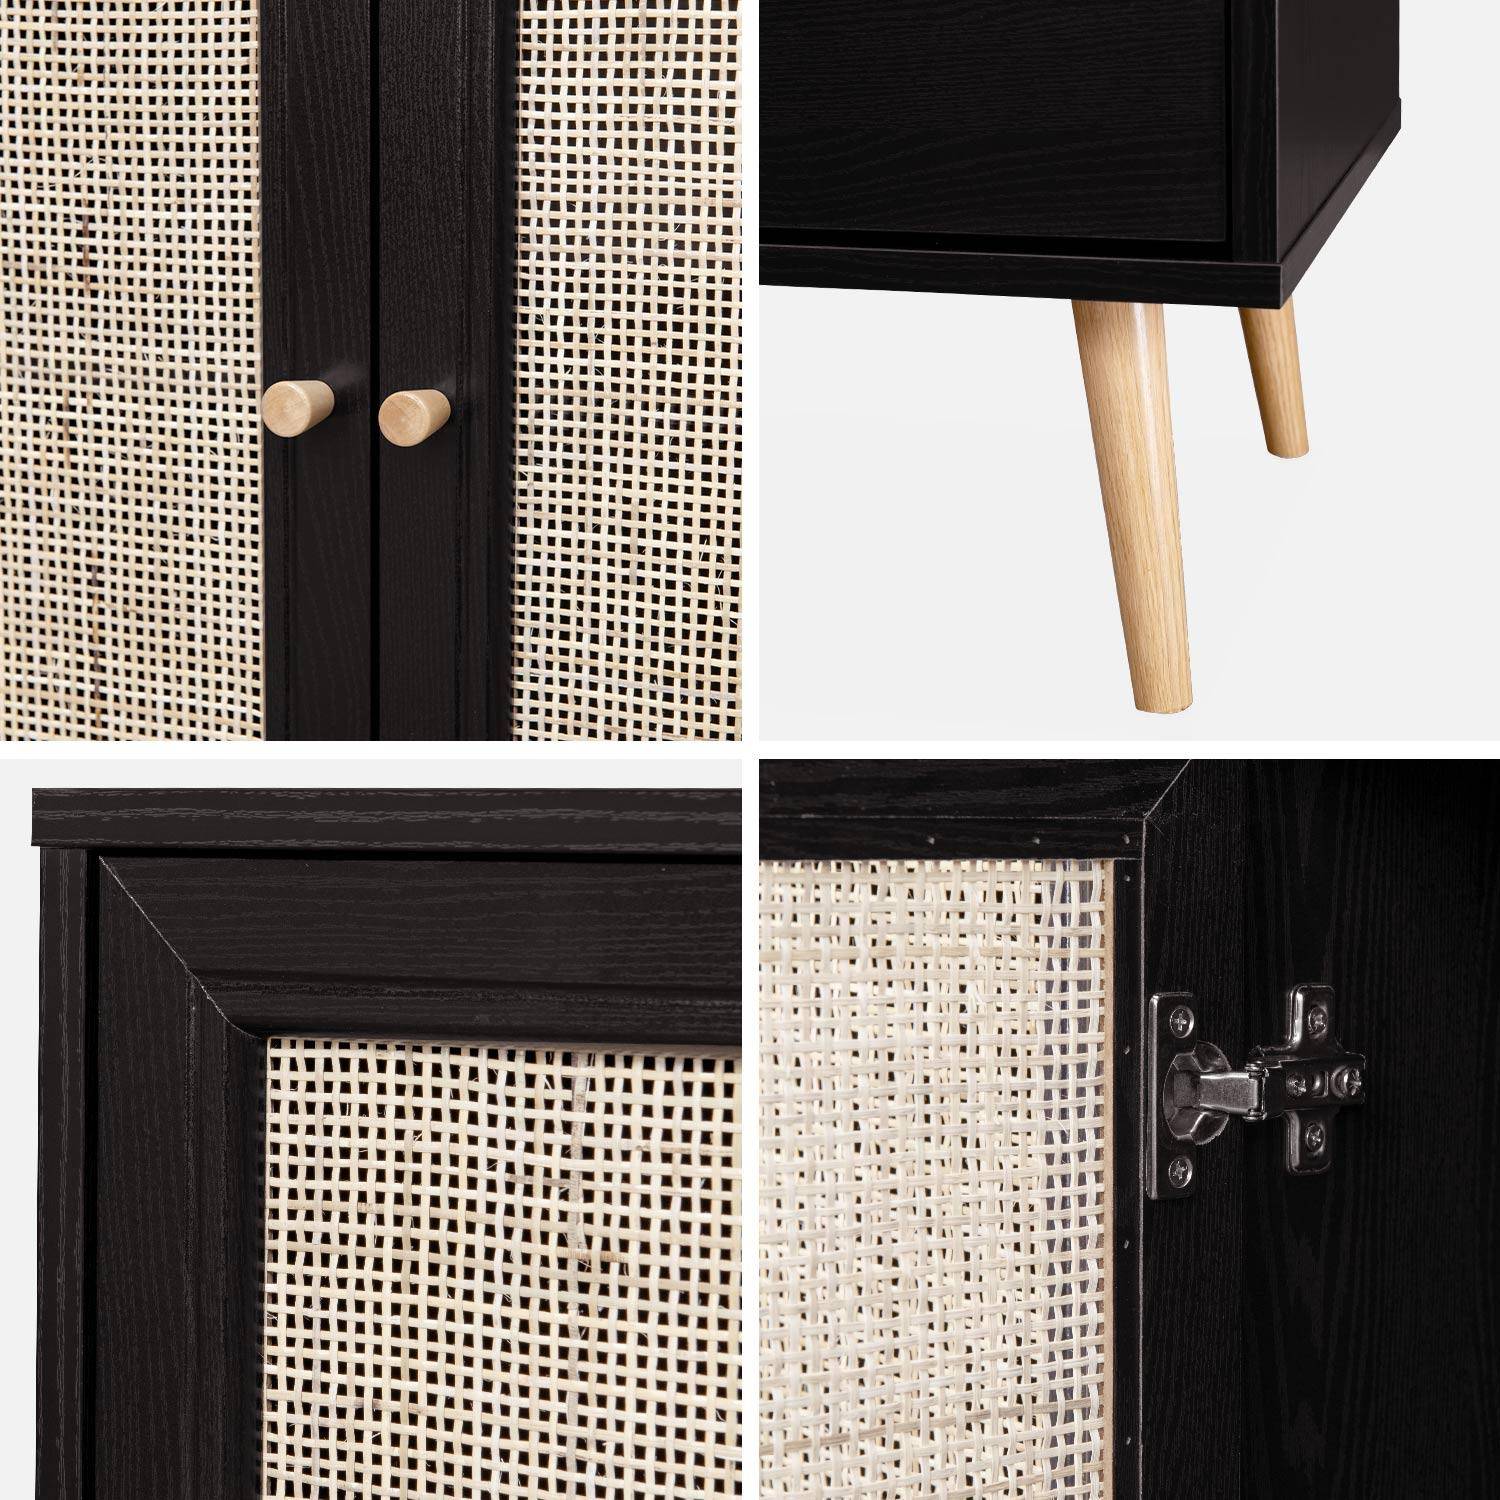 Wooden and cane rattan detail sideboard with 3 doors, 2 shelves, Scandi-style legs, 120x39x70cm - Boheme - Black Photo6